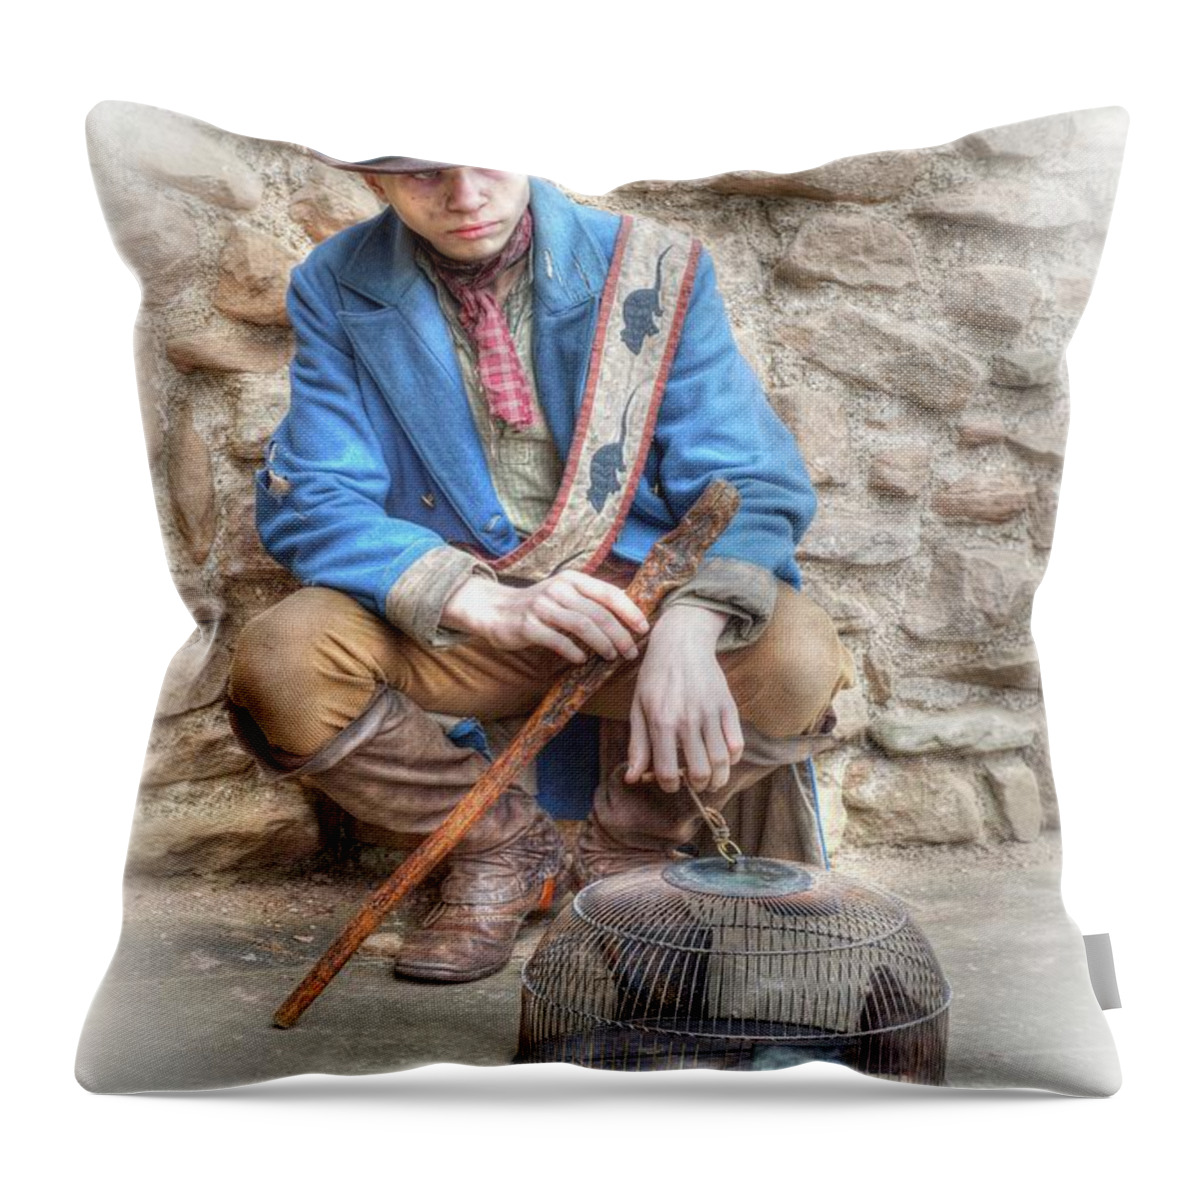 Ragged Throw Pillow featuring the photograph Ragged Victorians - The Rat Catcher by David Birchall